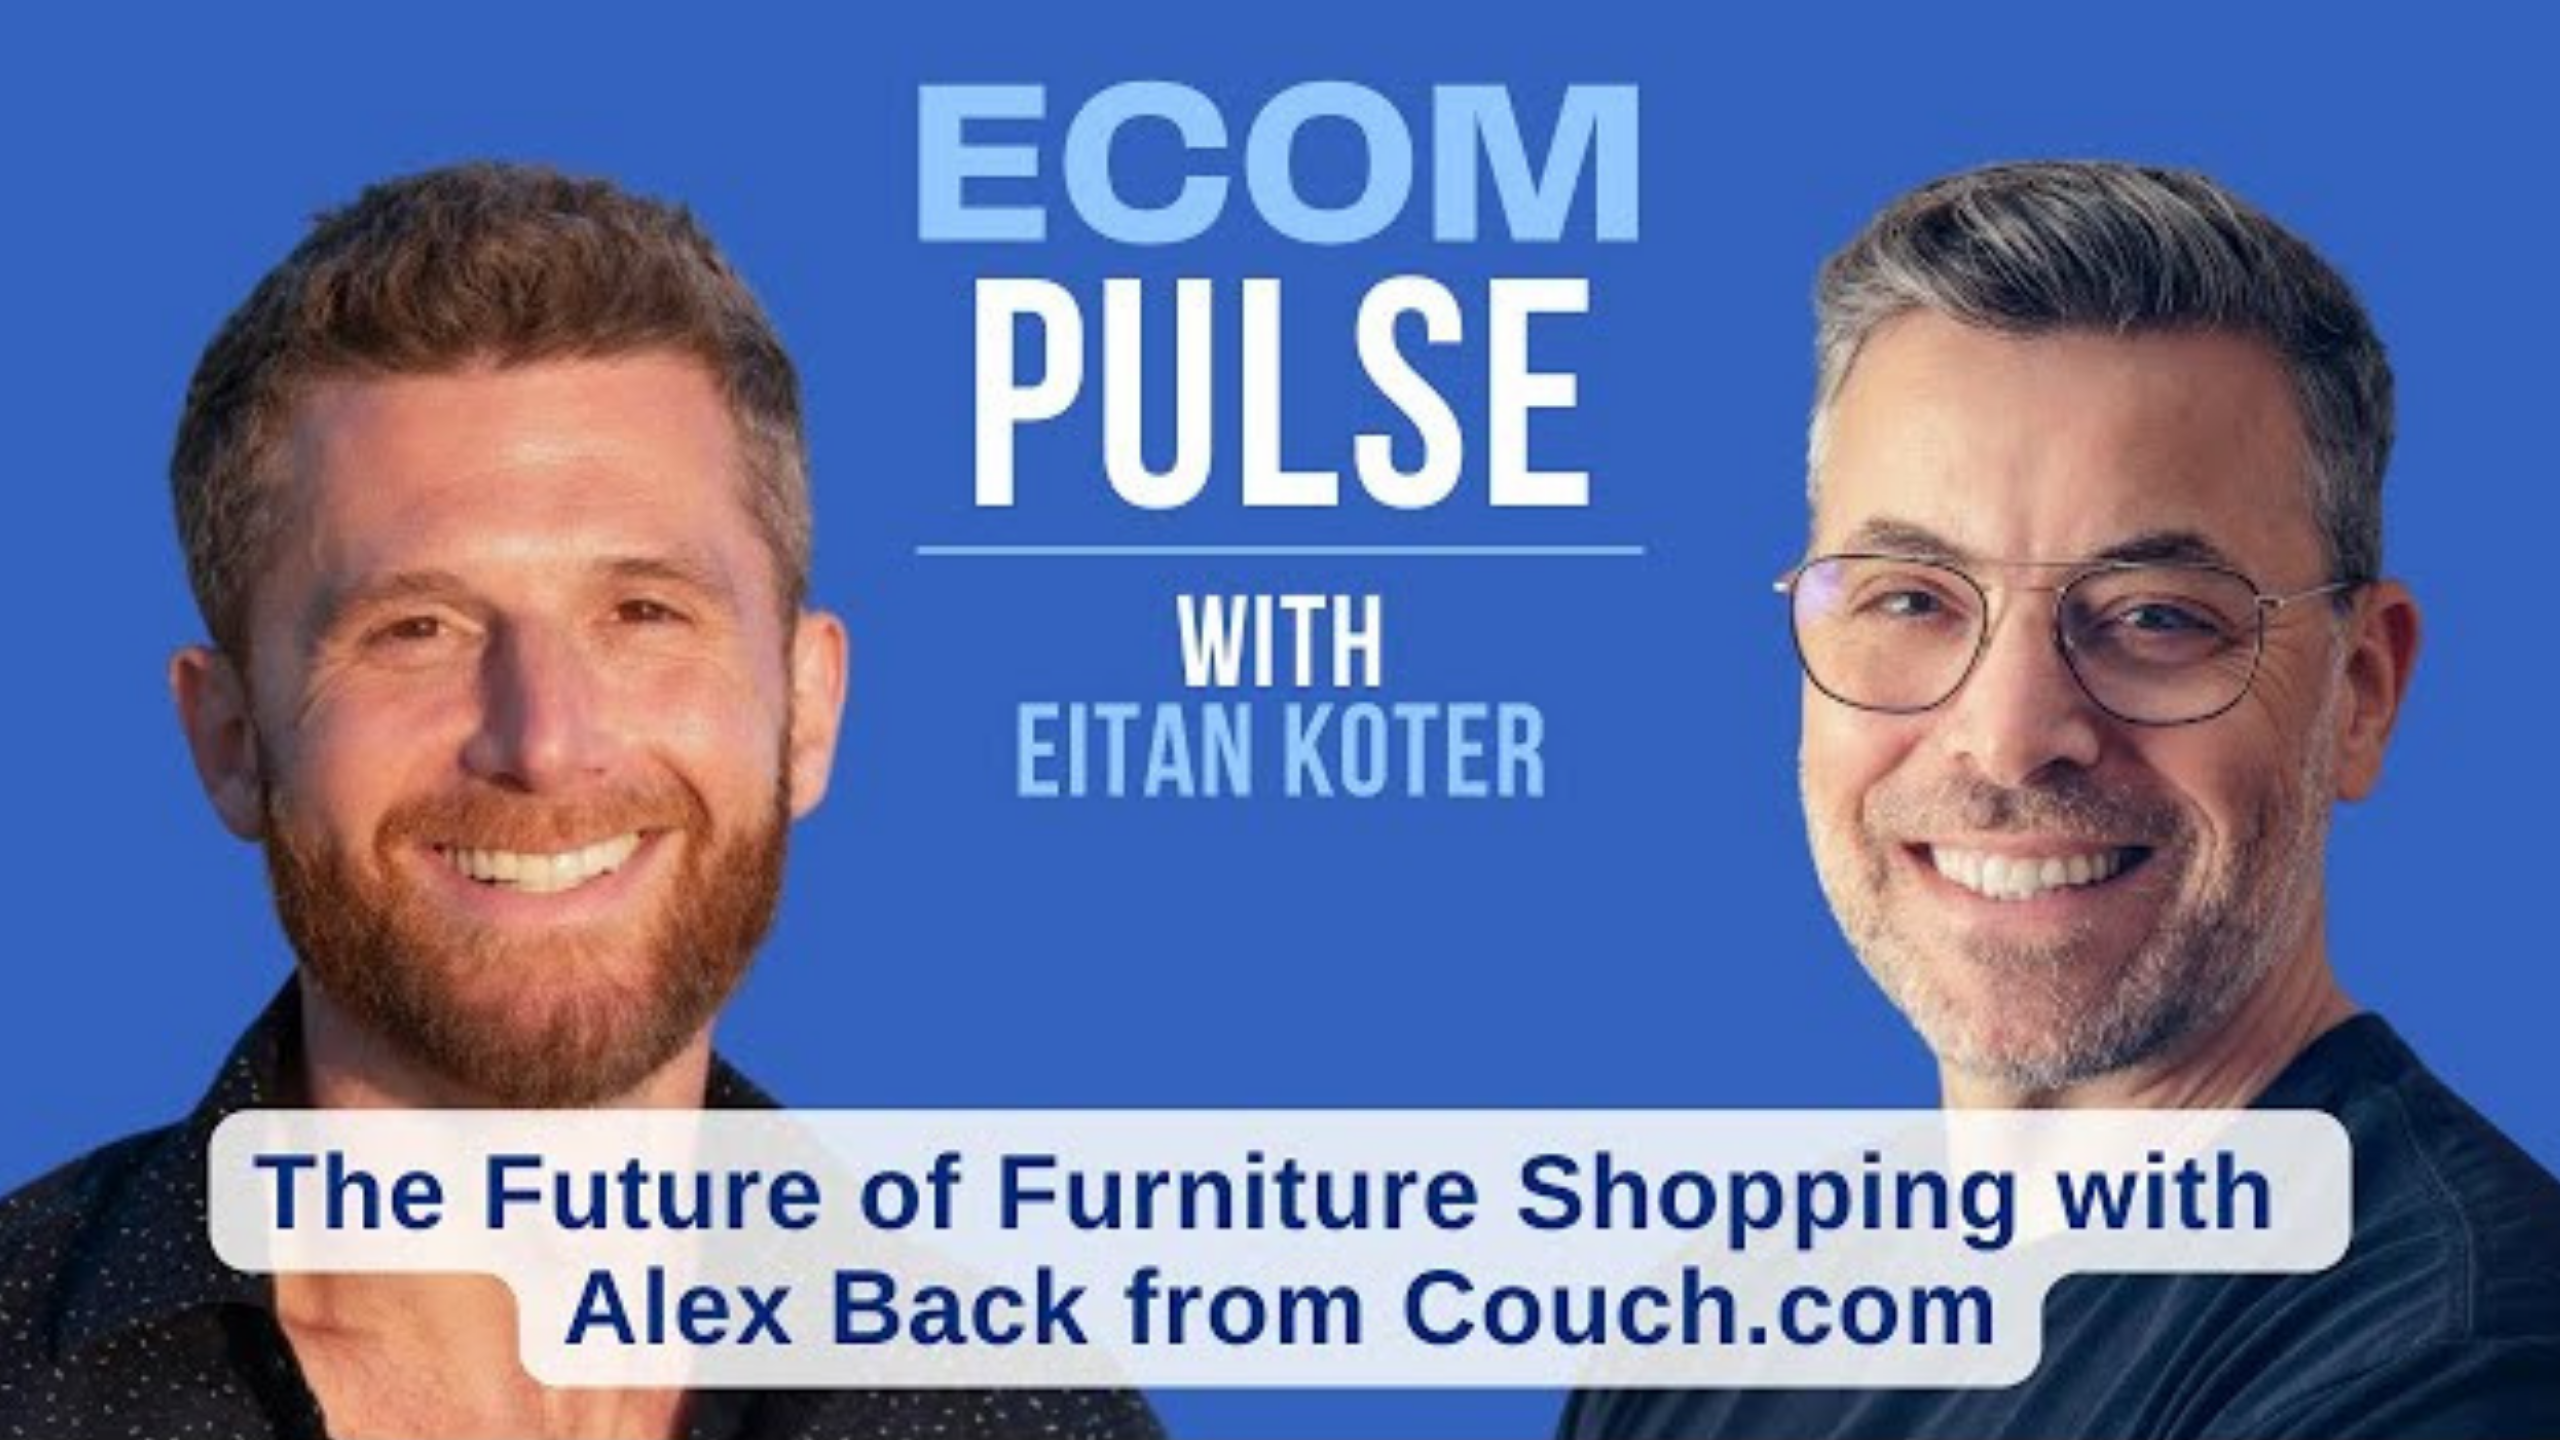 Two smiling men are featured on a blue background with the text "ECOM PULSE with Eitan Koter" above them. The bottom banner reads "The Future of Furniture Shopping with Alex Back from Couch.com".